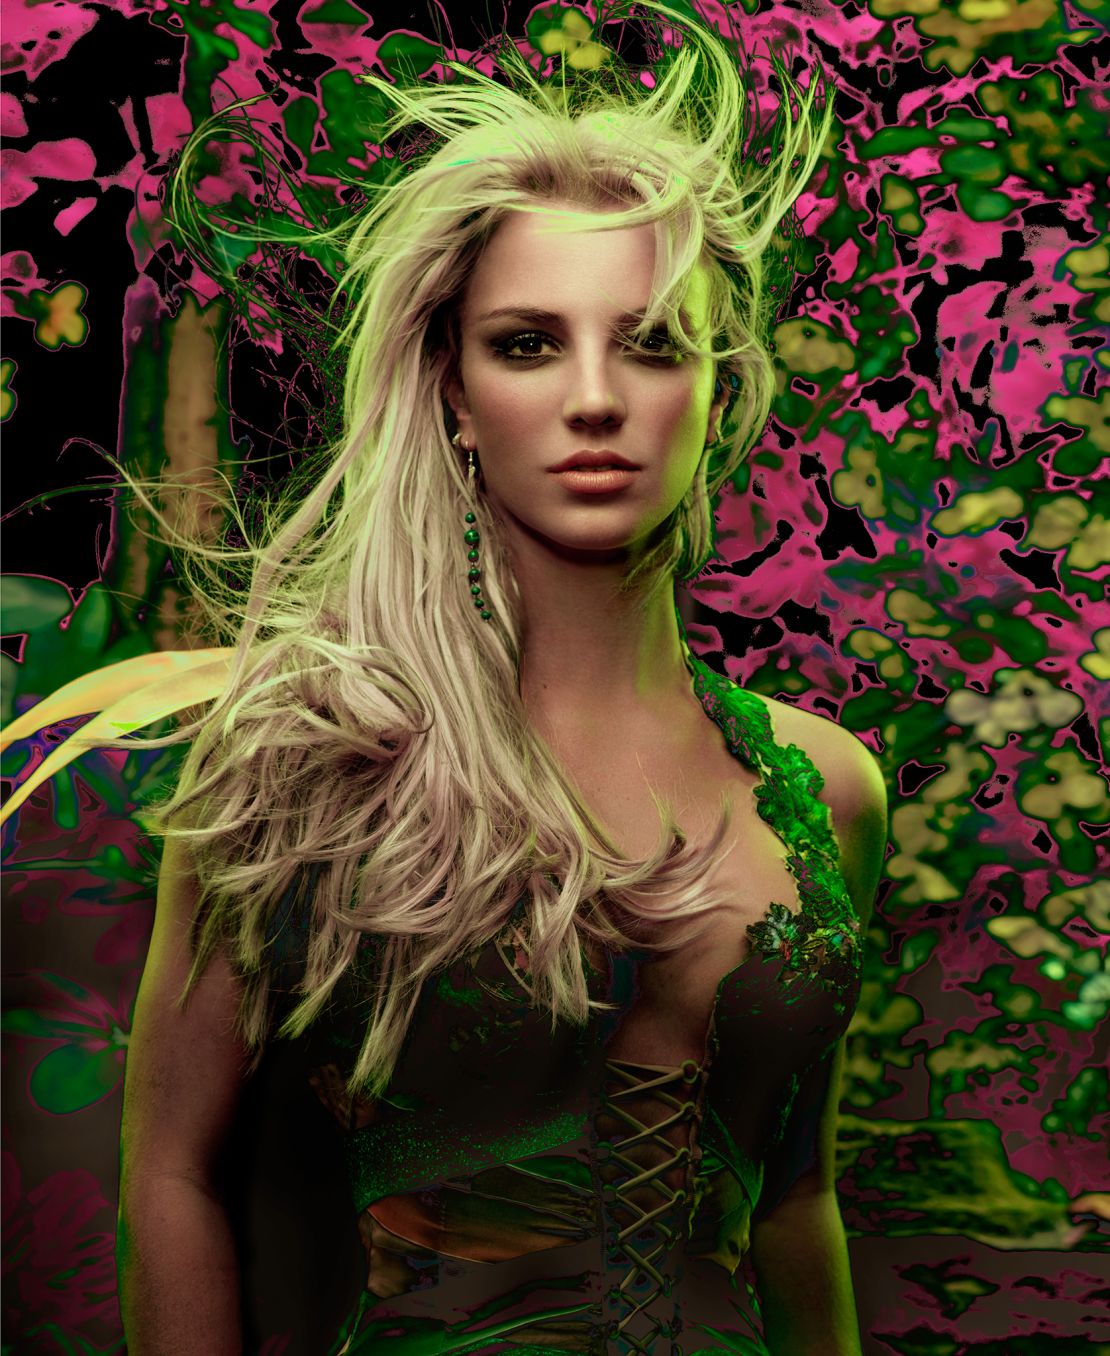 Britney Spears hired Klinko to produce a series of dramatic, neon-colored images to use in photobooks and tours for her 2004 "Onyx Hotel" tour. 